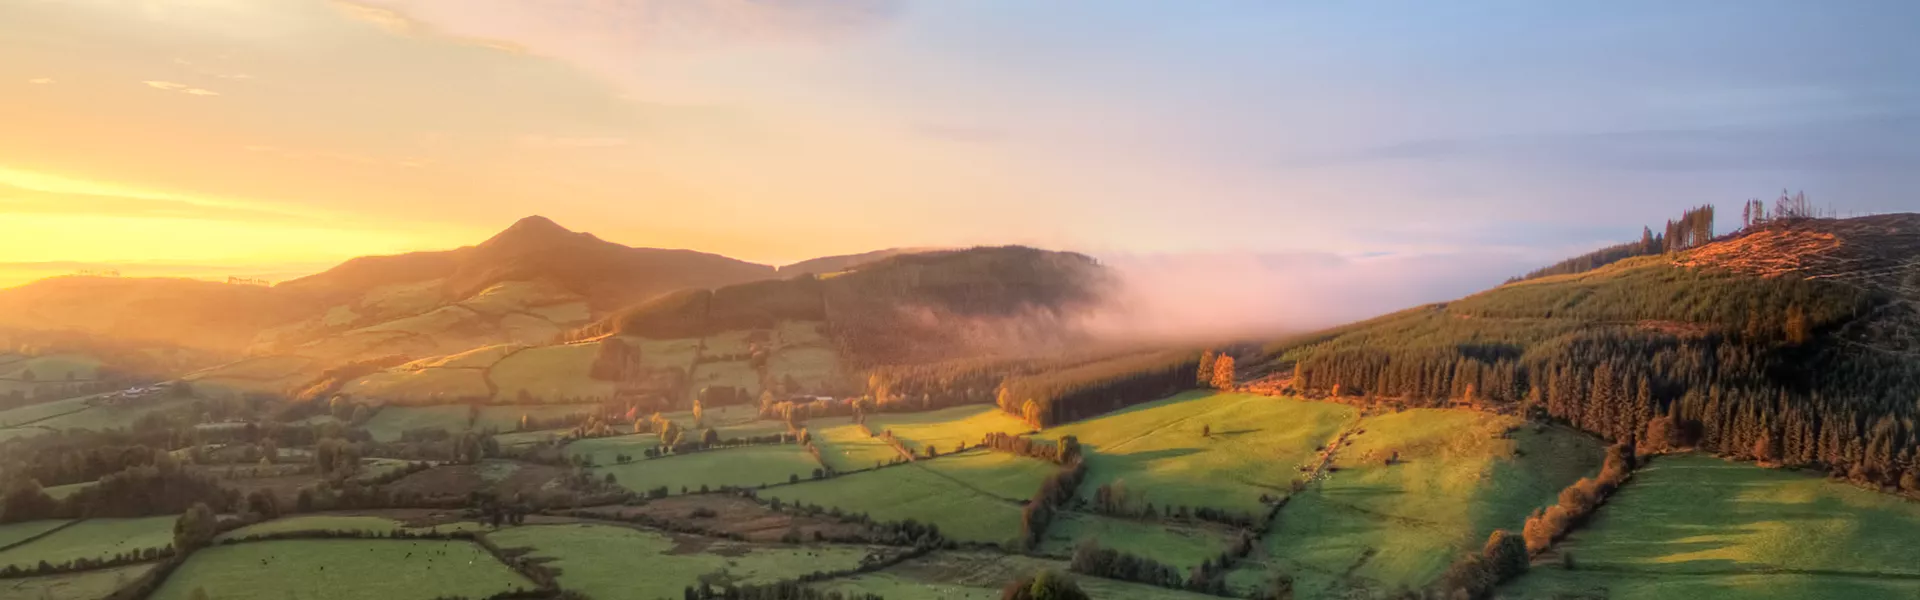 The sun rises over Tipperary Mountain in Ireland